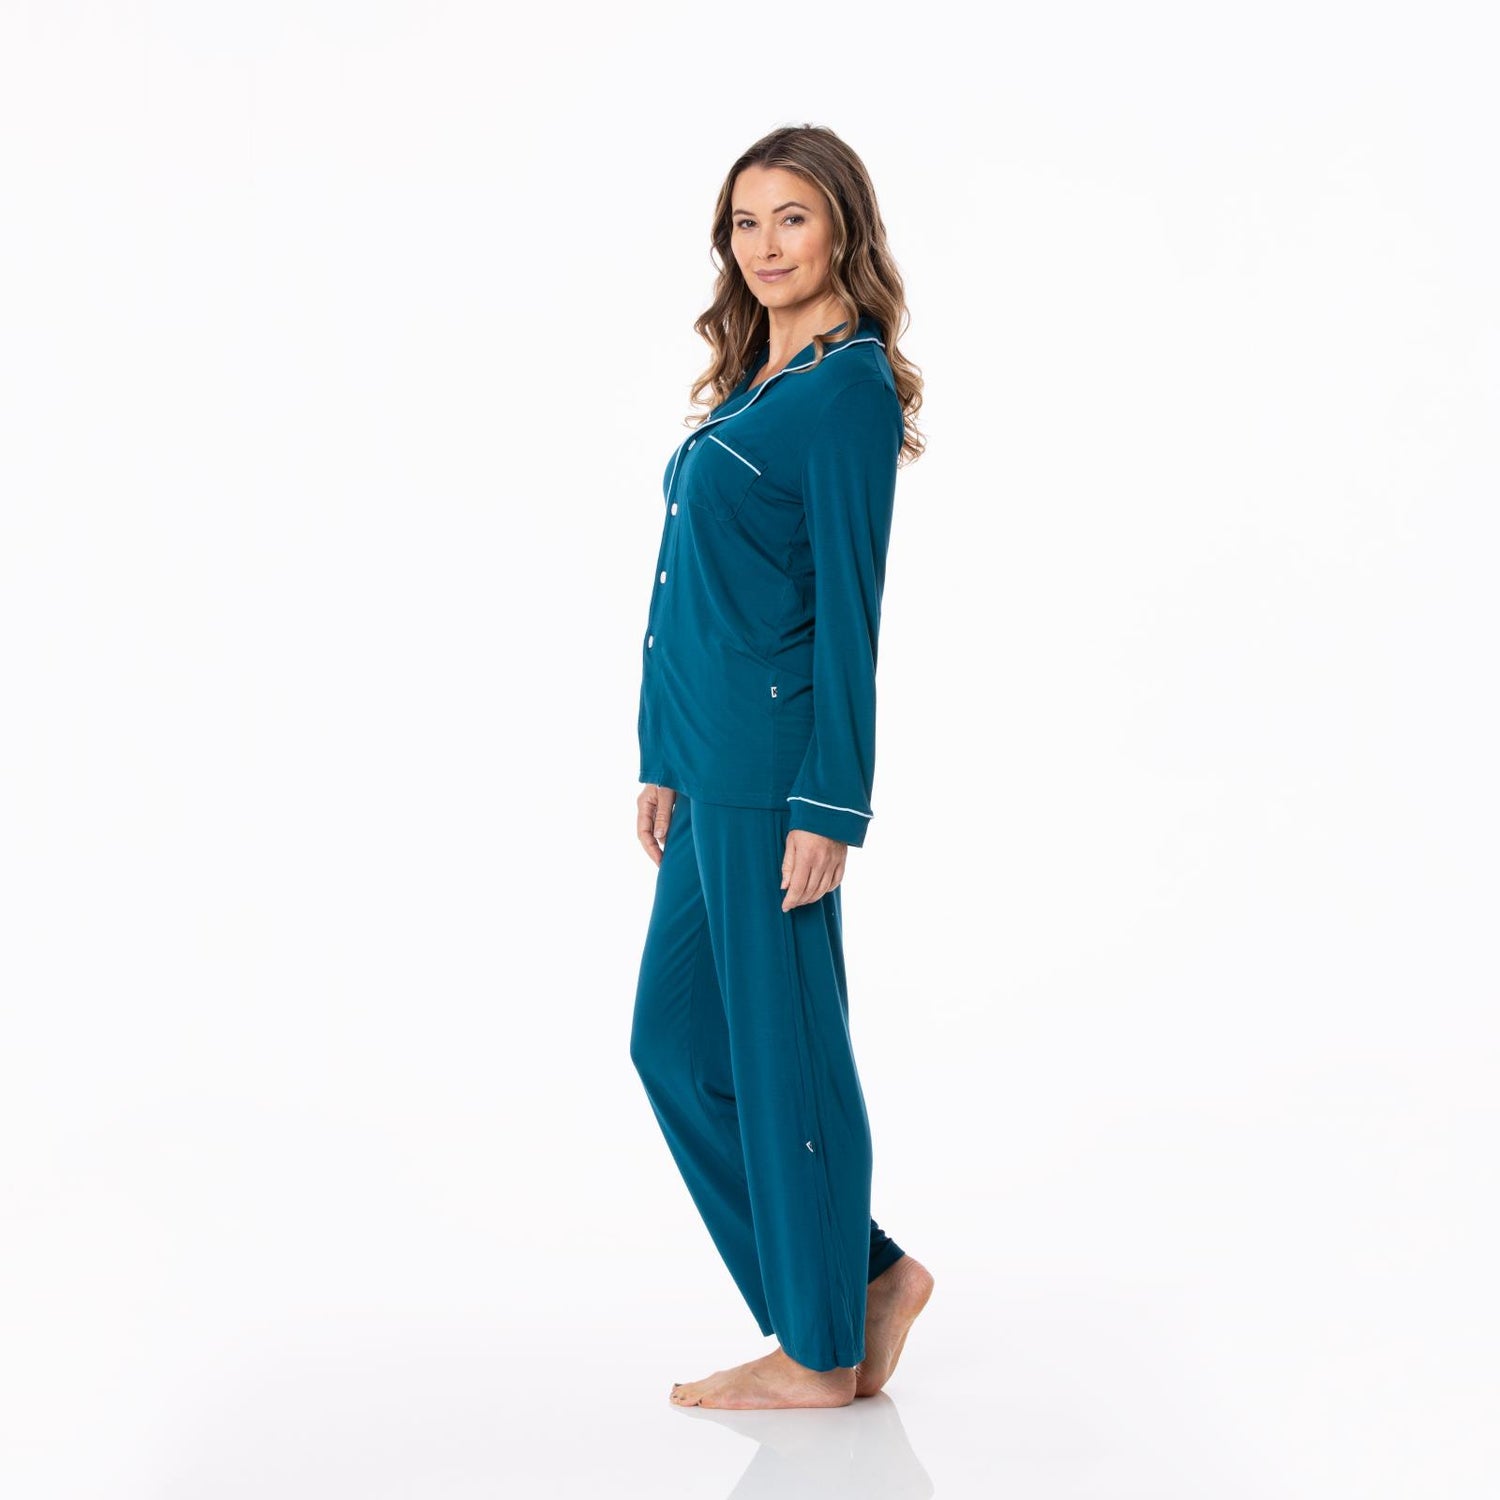 Women's Long Sleeved Collared Pajama Set in Peacock with Pond